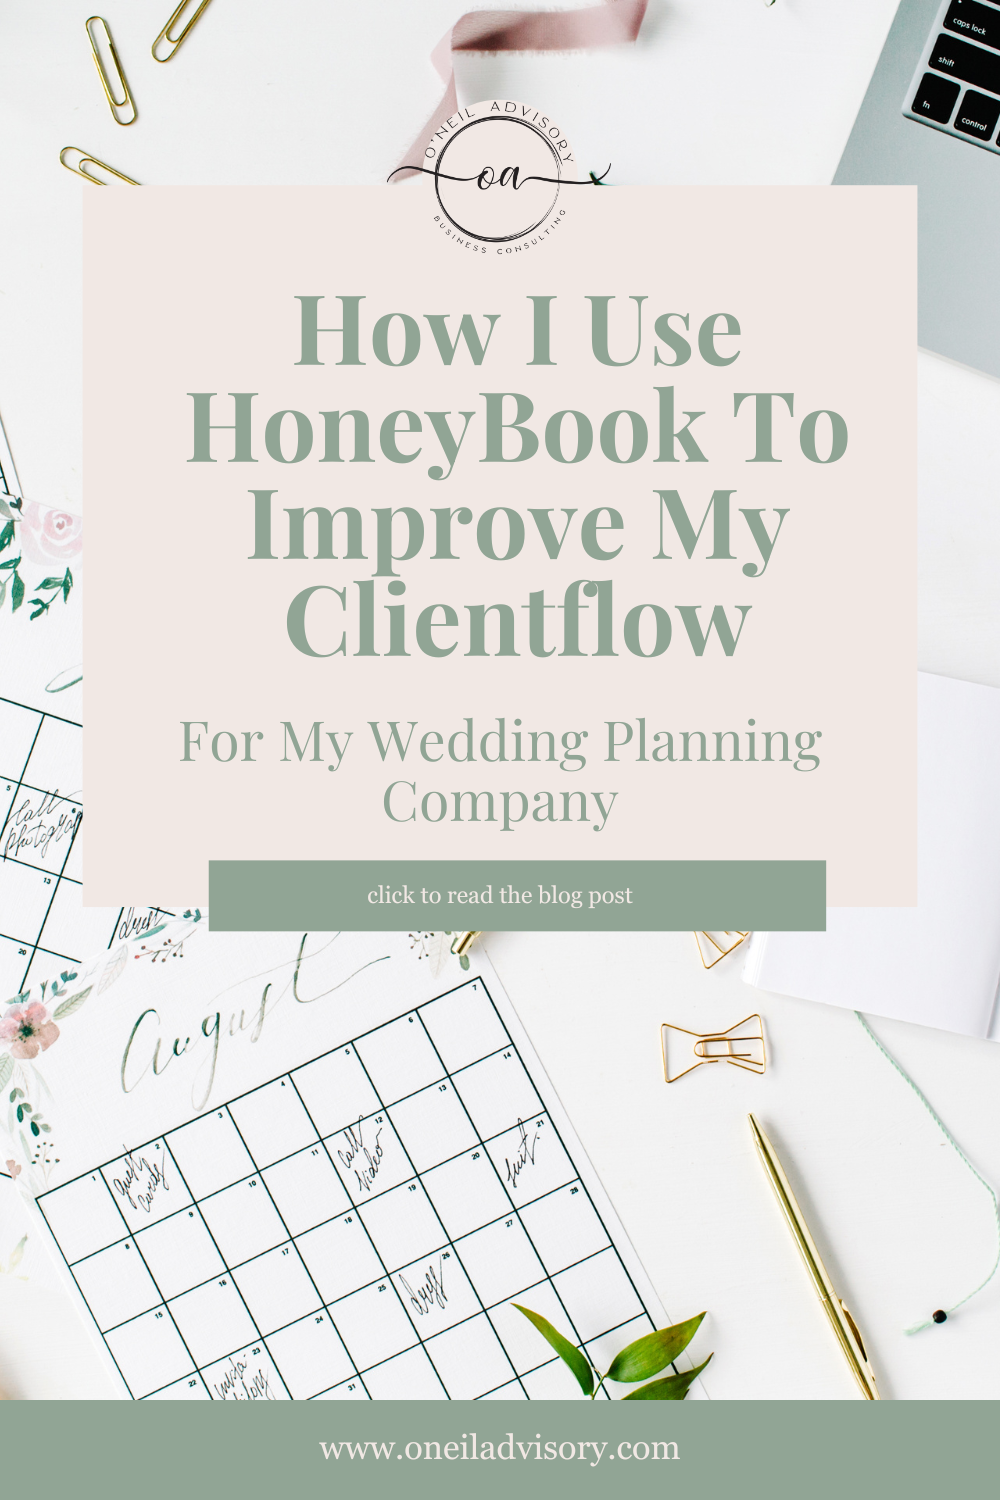 How I Use HoneyBook To Improve My Clientflow For My Wedding Planning Company